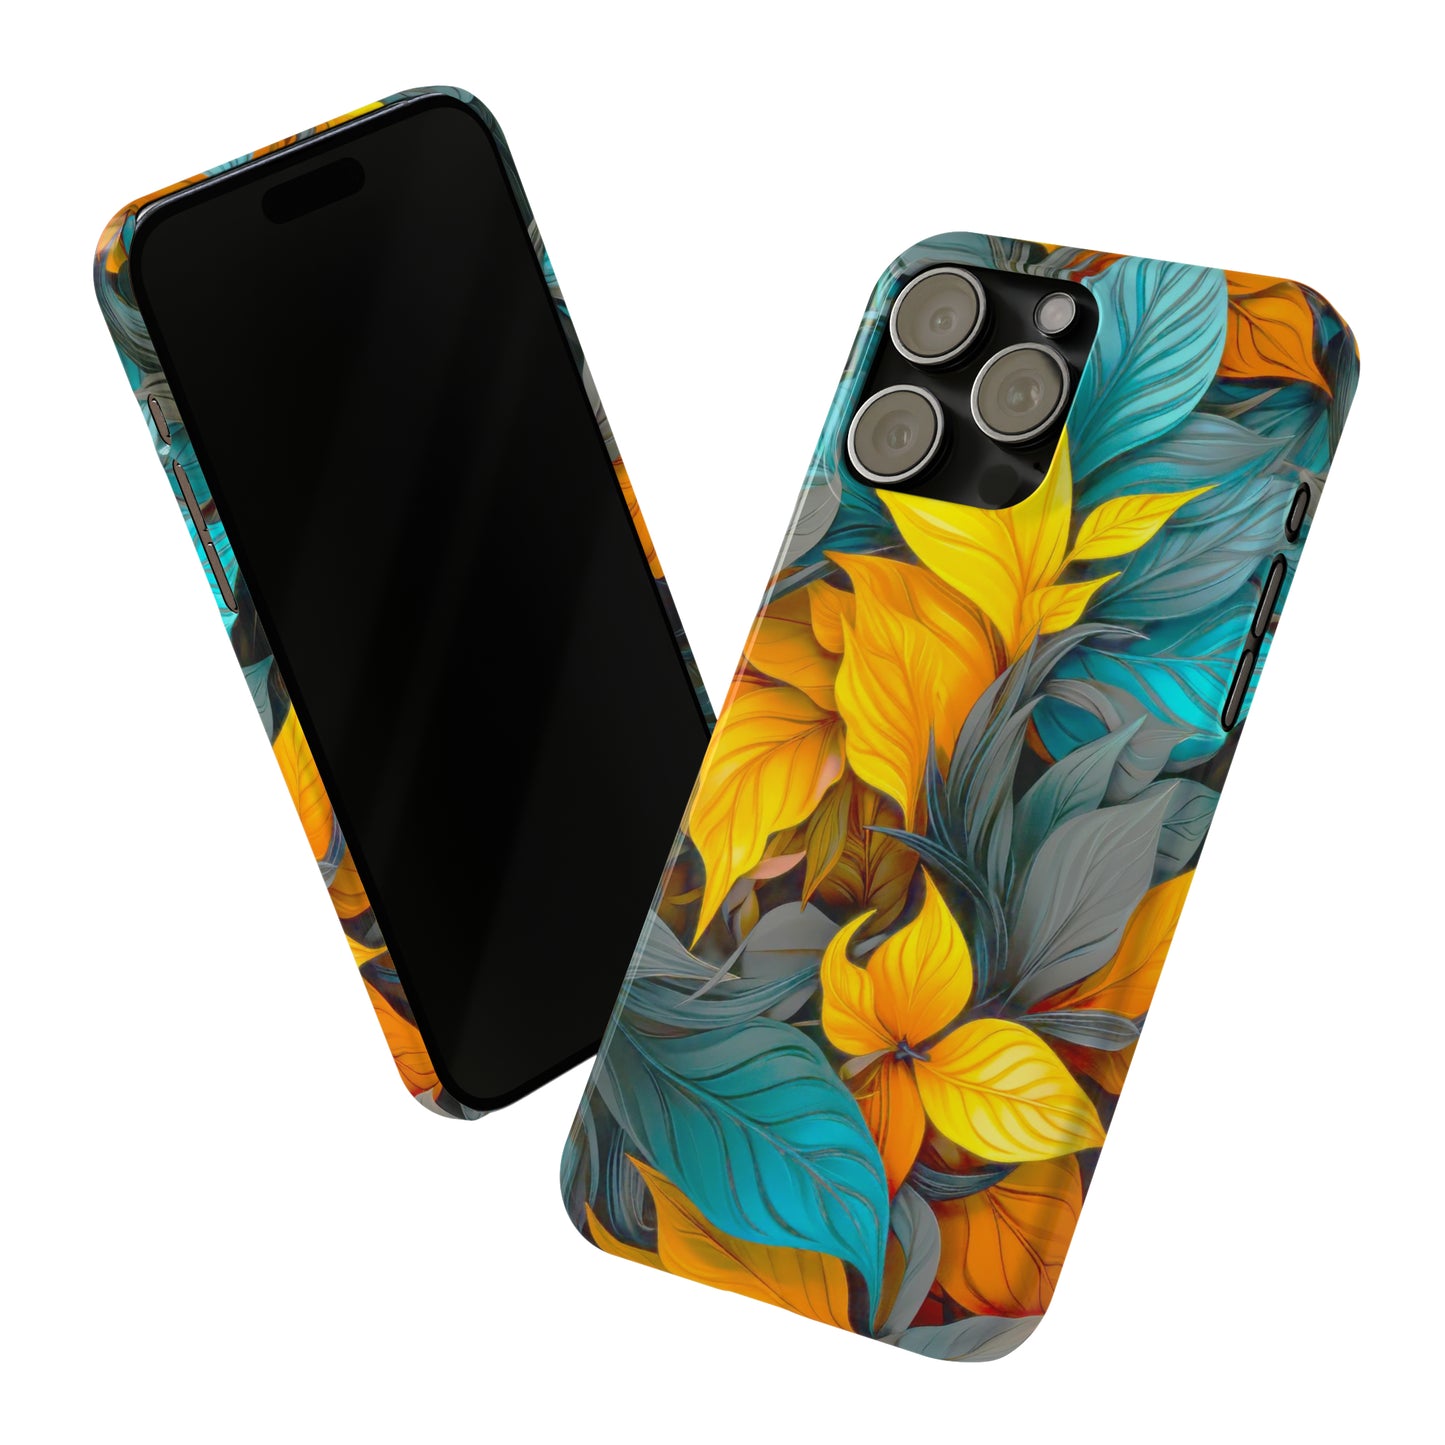 Dynamic Abstract iPhone Case